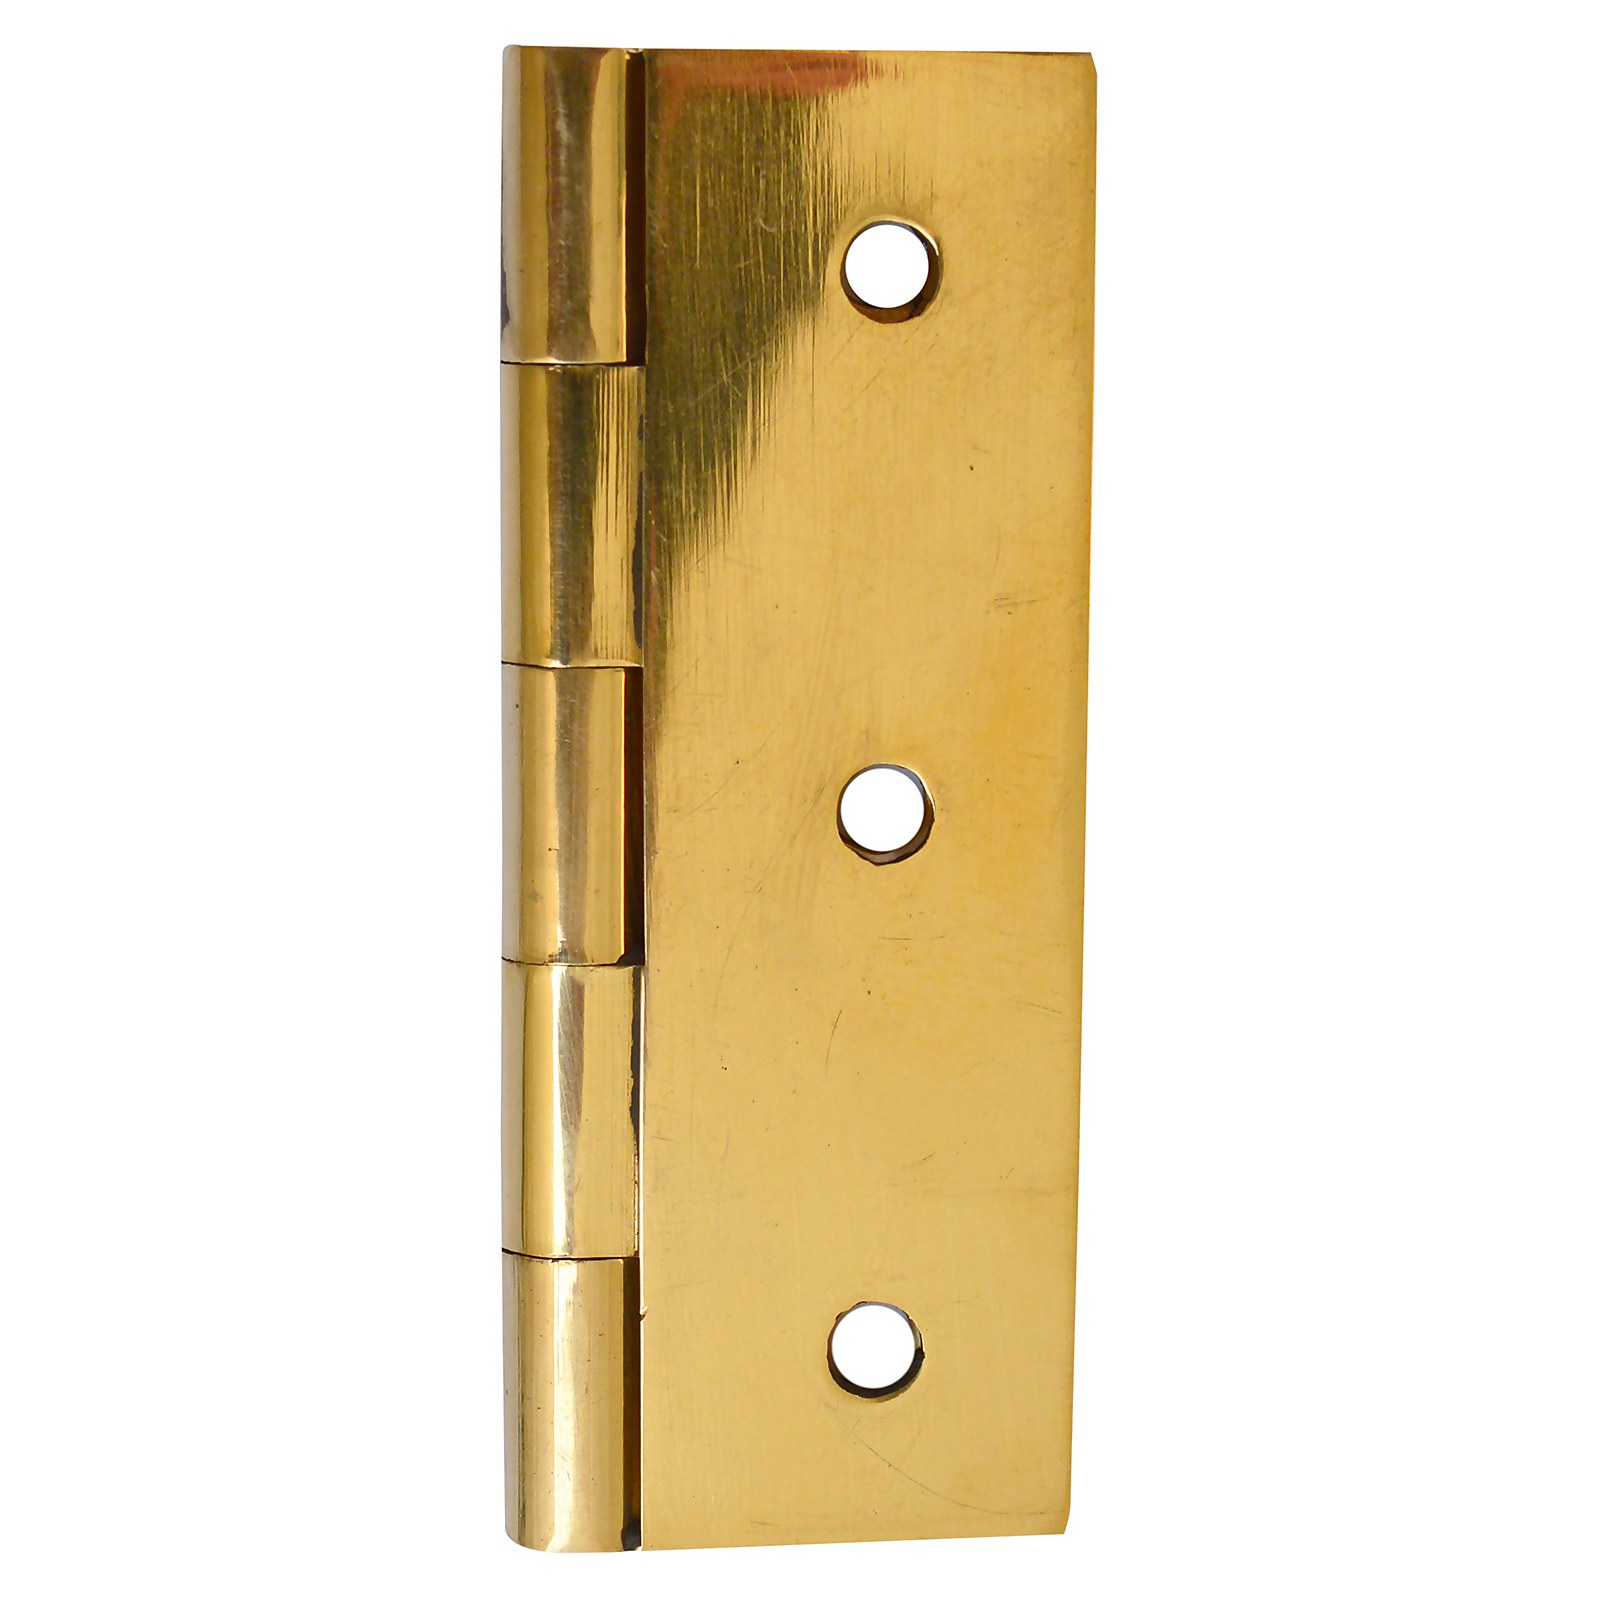 Photo of Butt Hinge Steel 63mm Electro Brass - 2 Pack